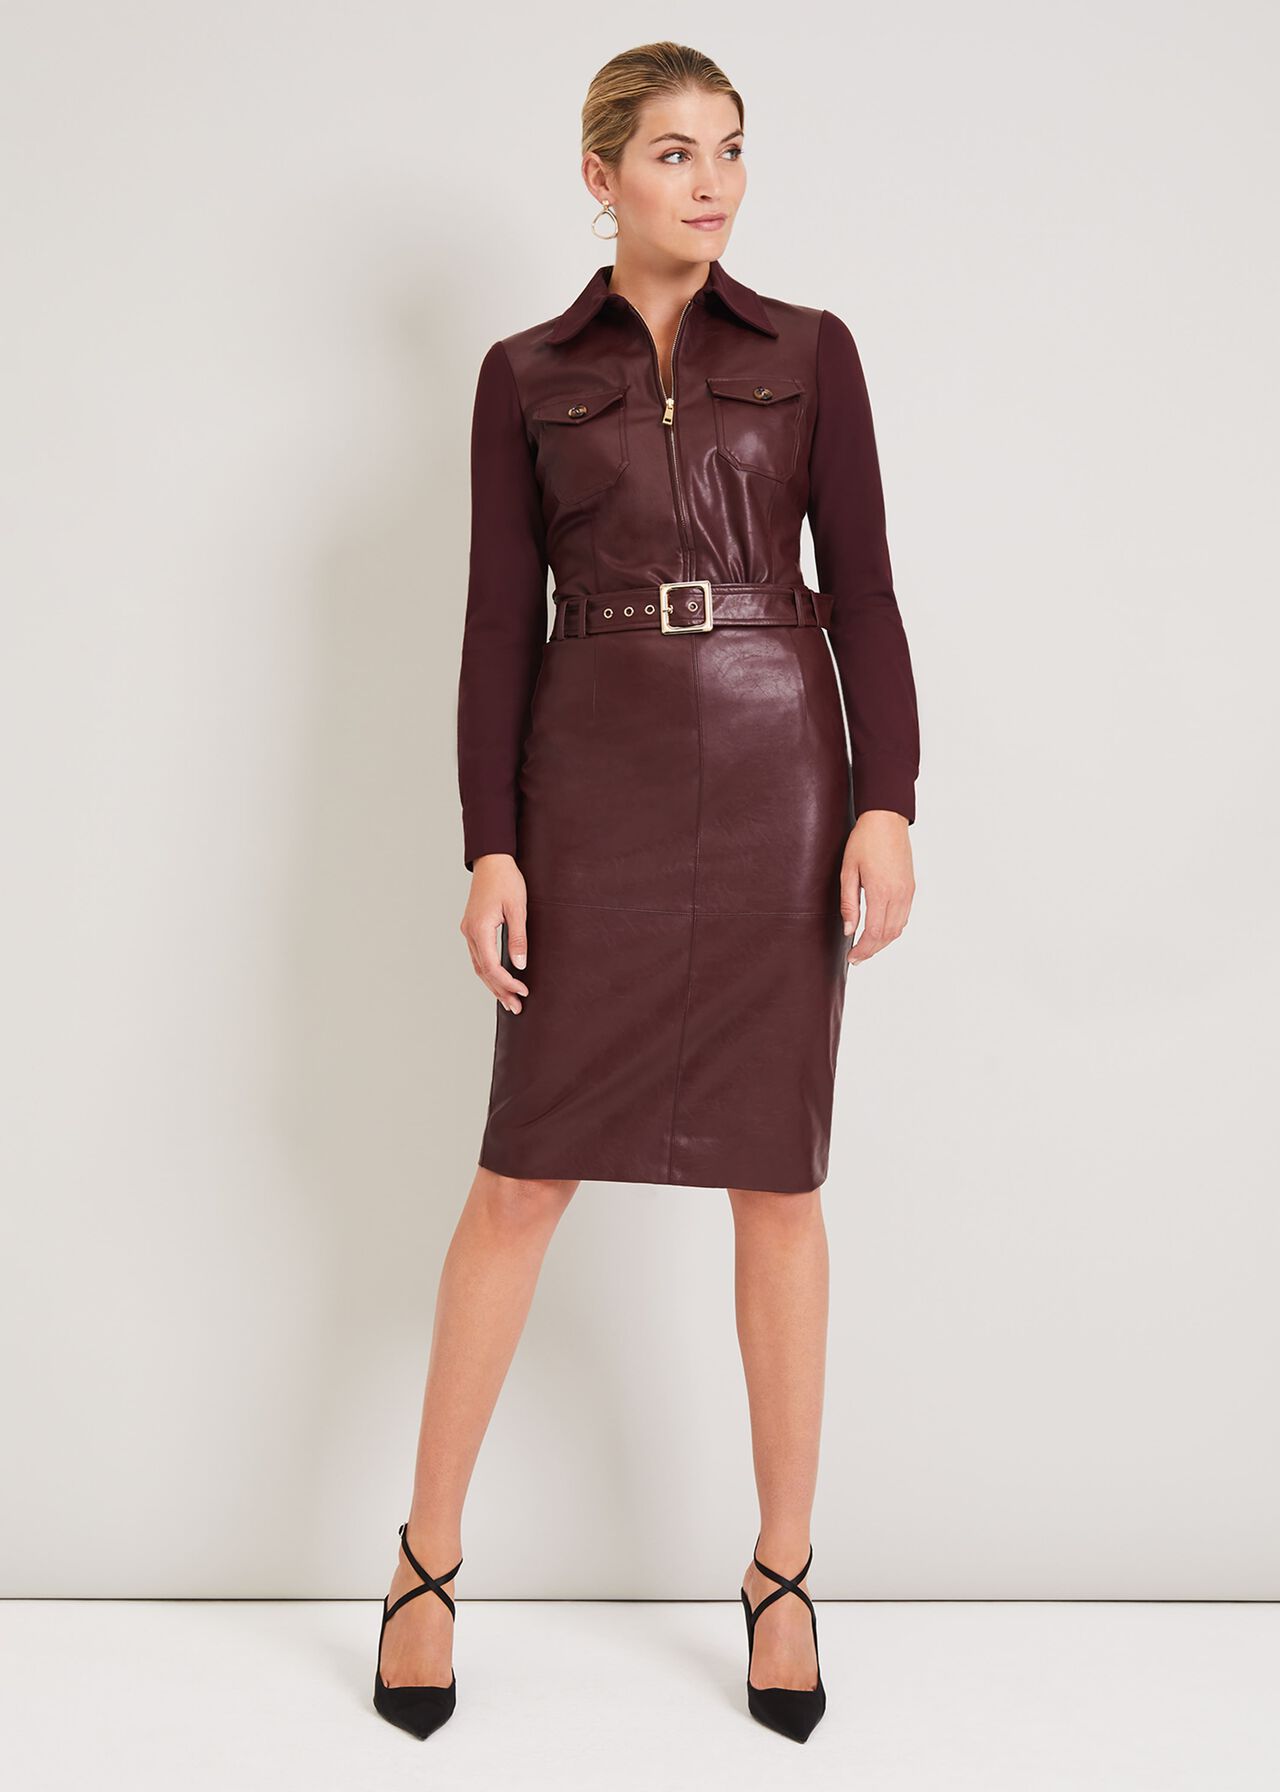 Maeve Faux Leather Skirt